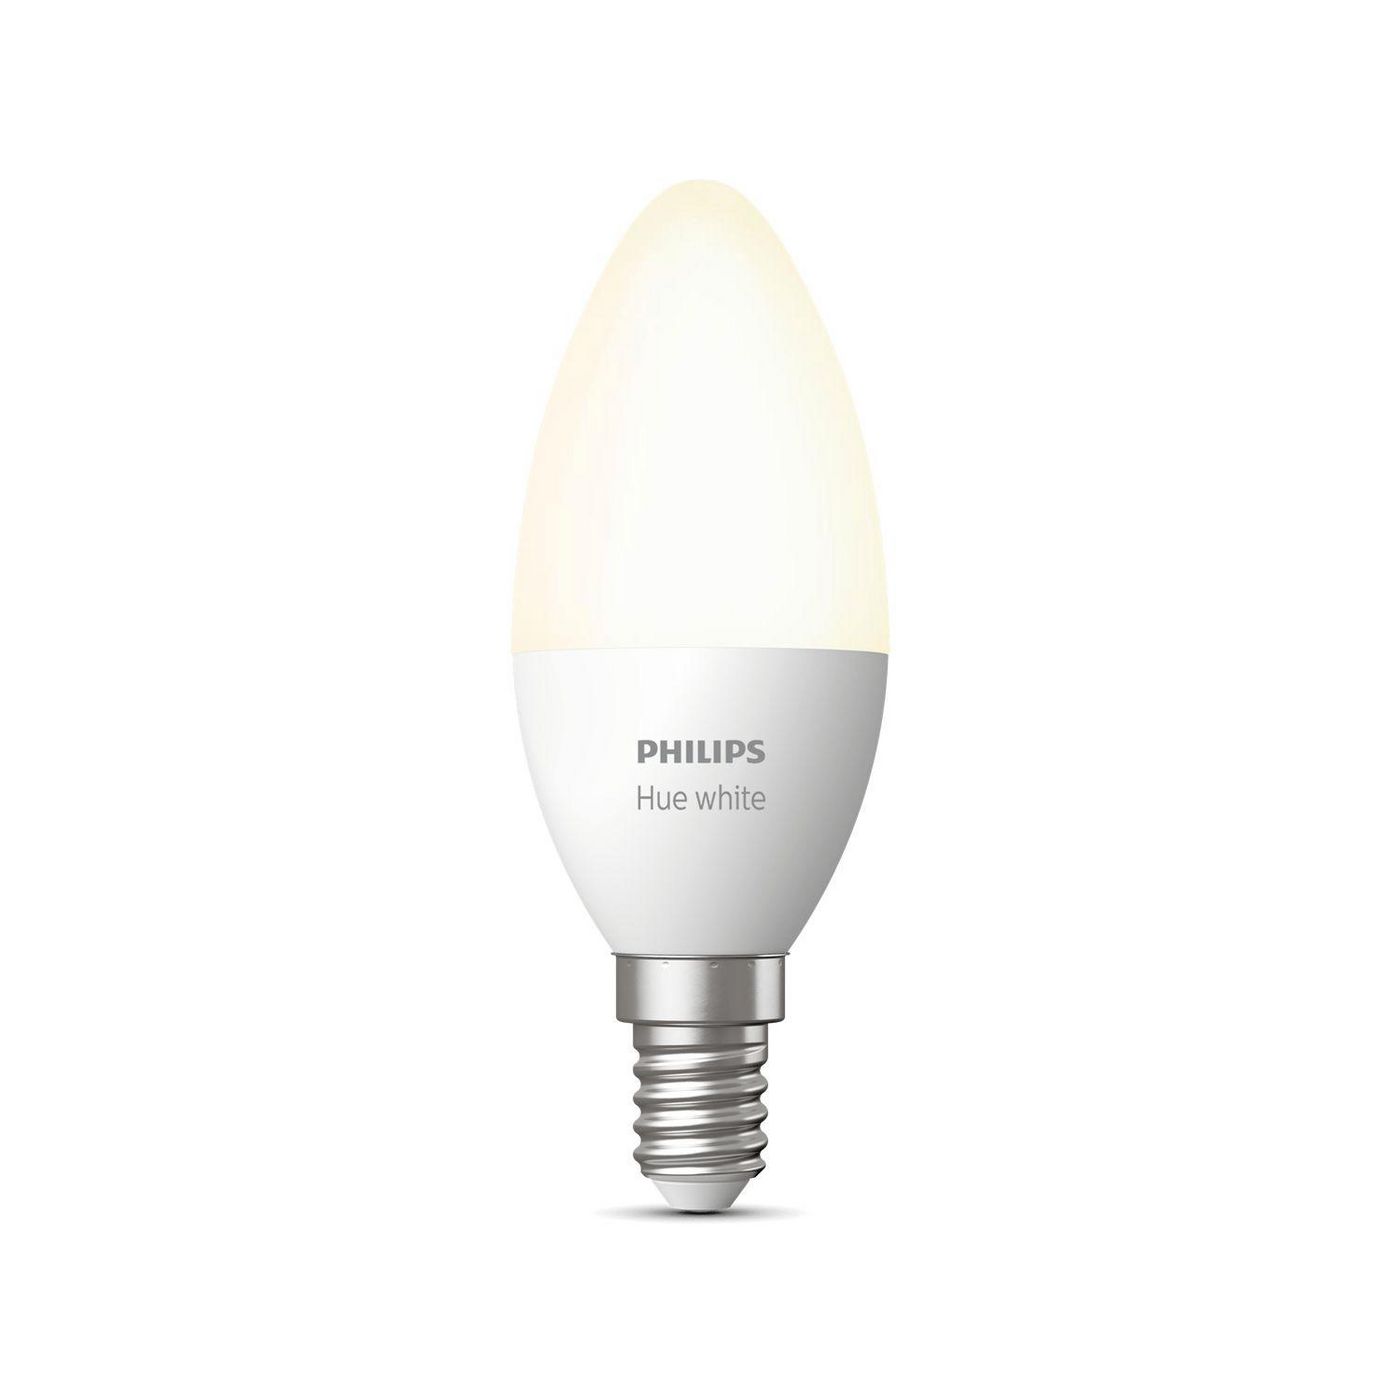 Philips-by-Signify 929002039901 Hue White E14 Bulb - BT 